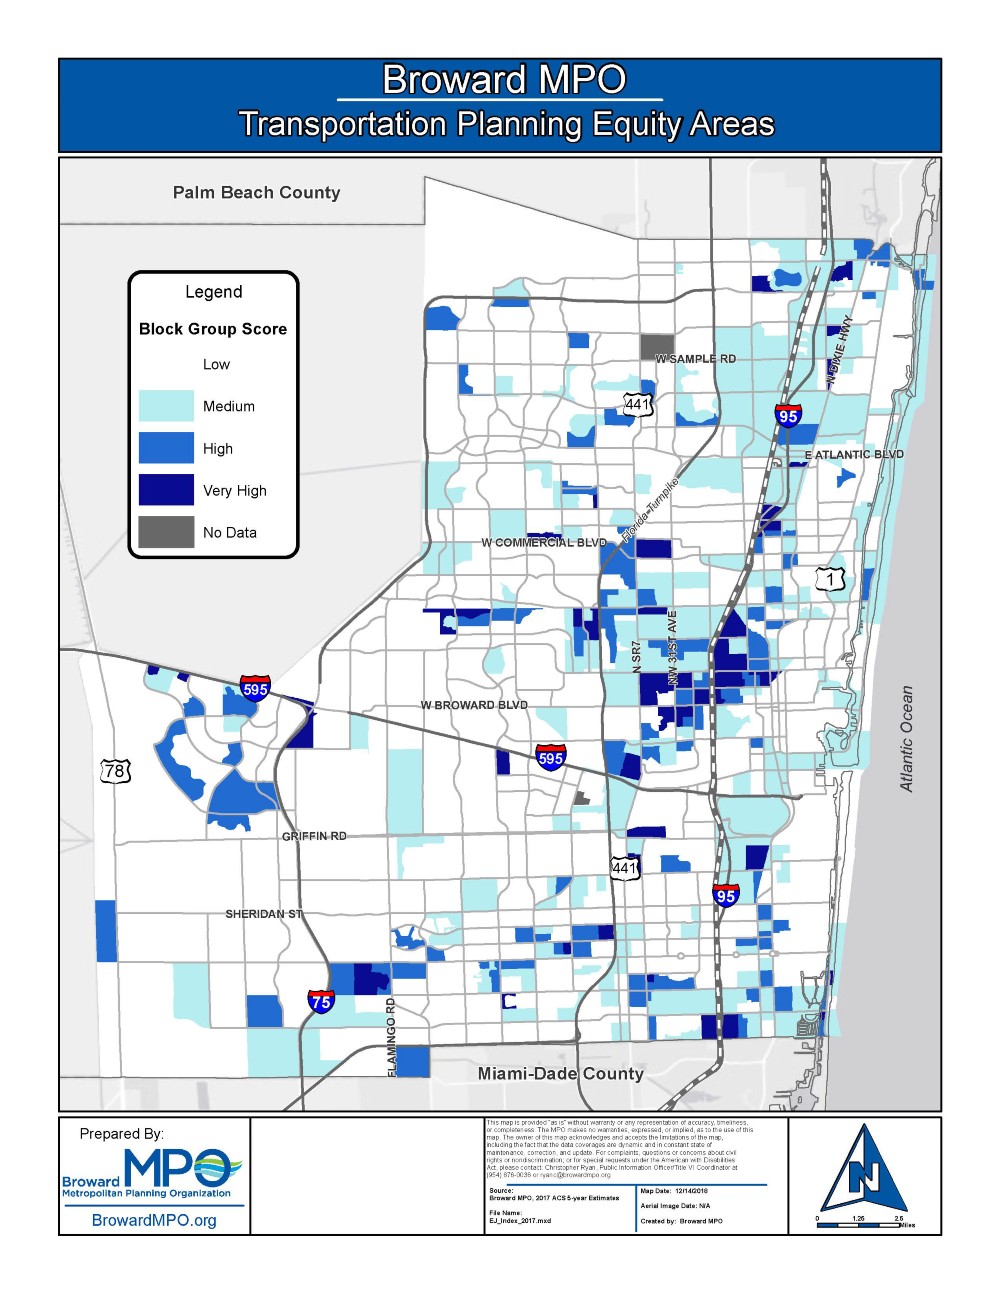 20181219 BMPO Transportation Planning Equity Assessment Map 2017 ACA Data